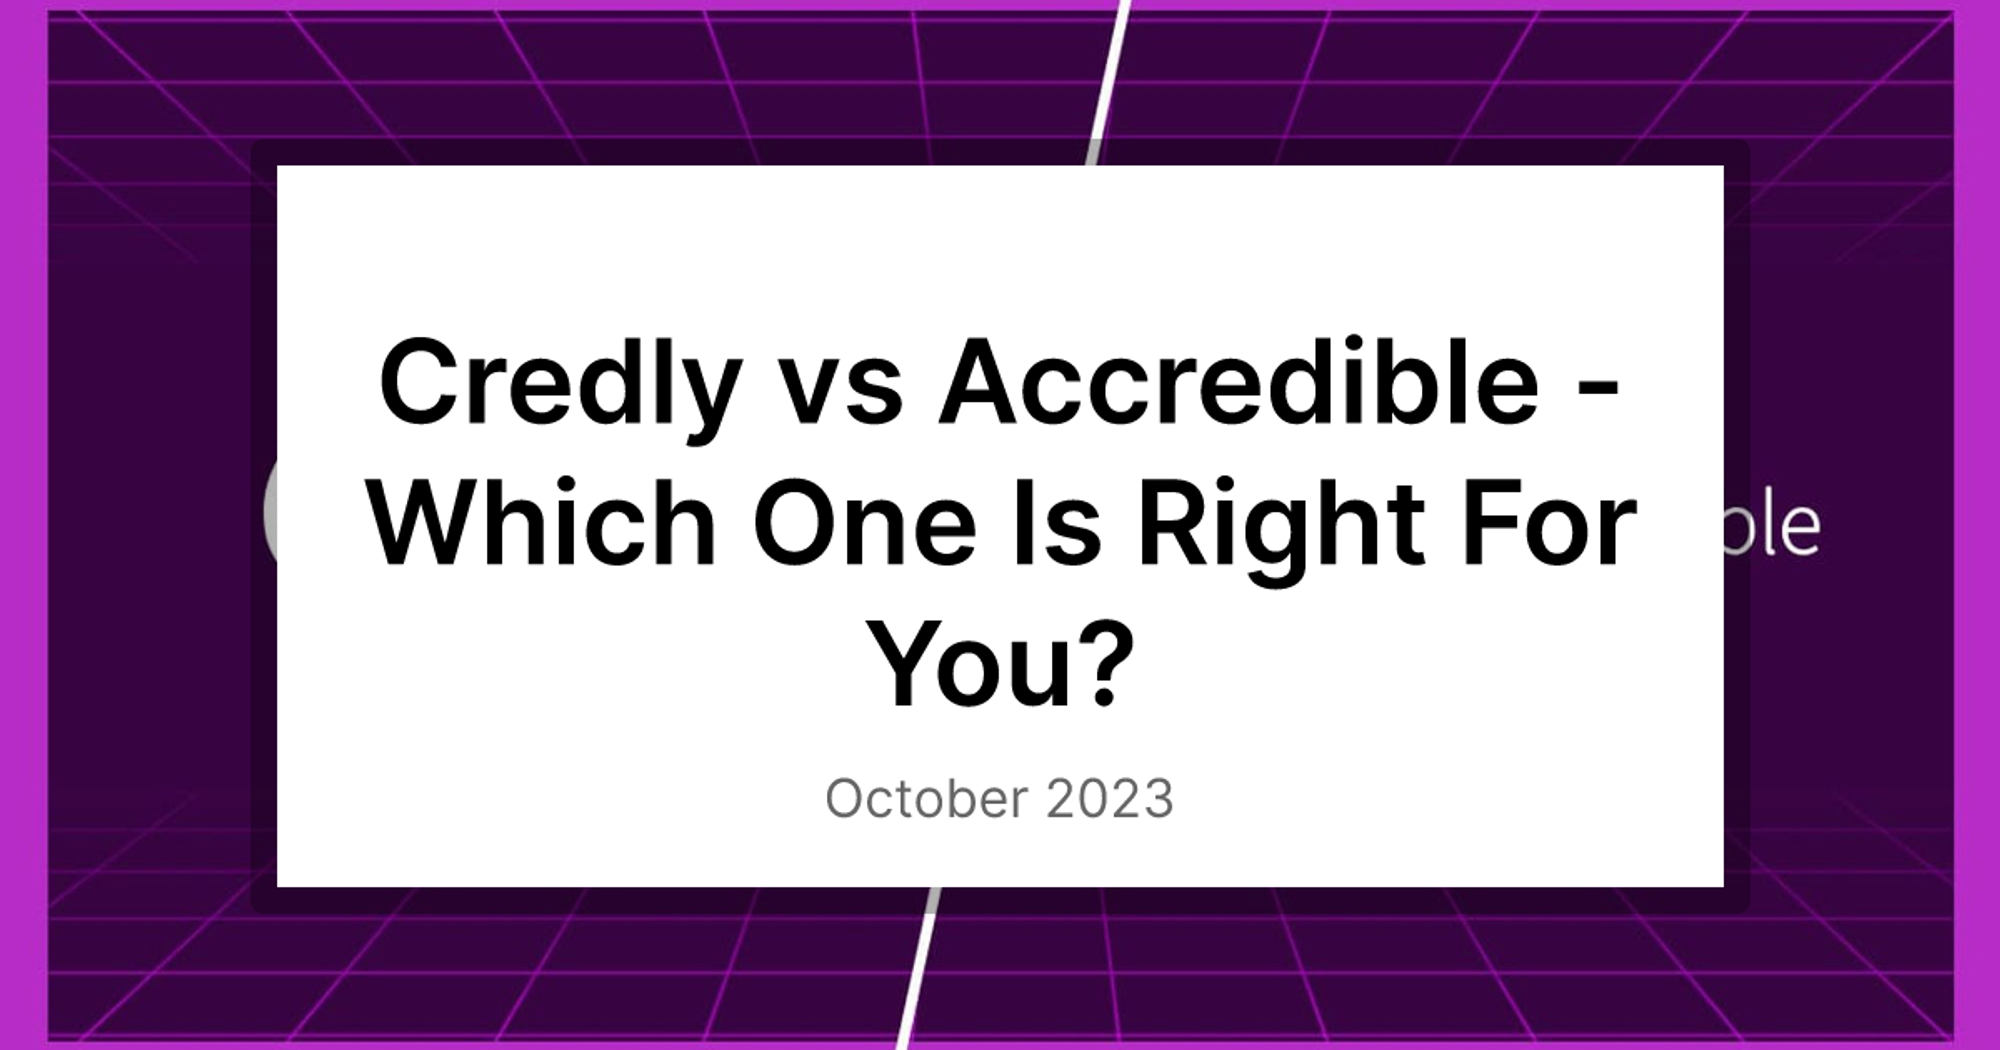 Credly vs Accredible - Which One Is Right For You?